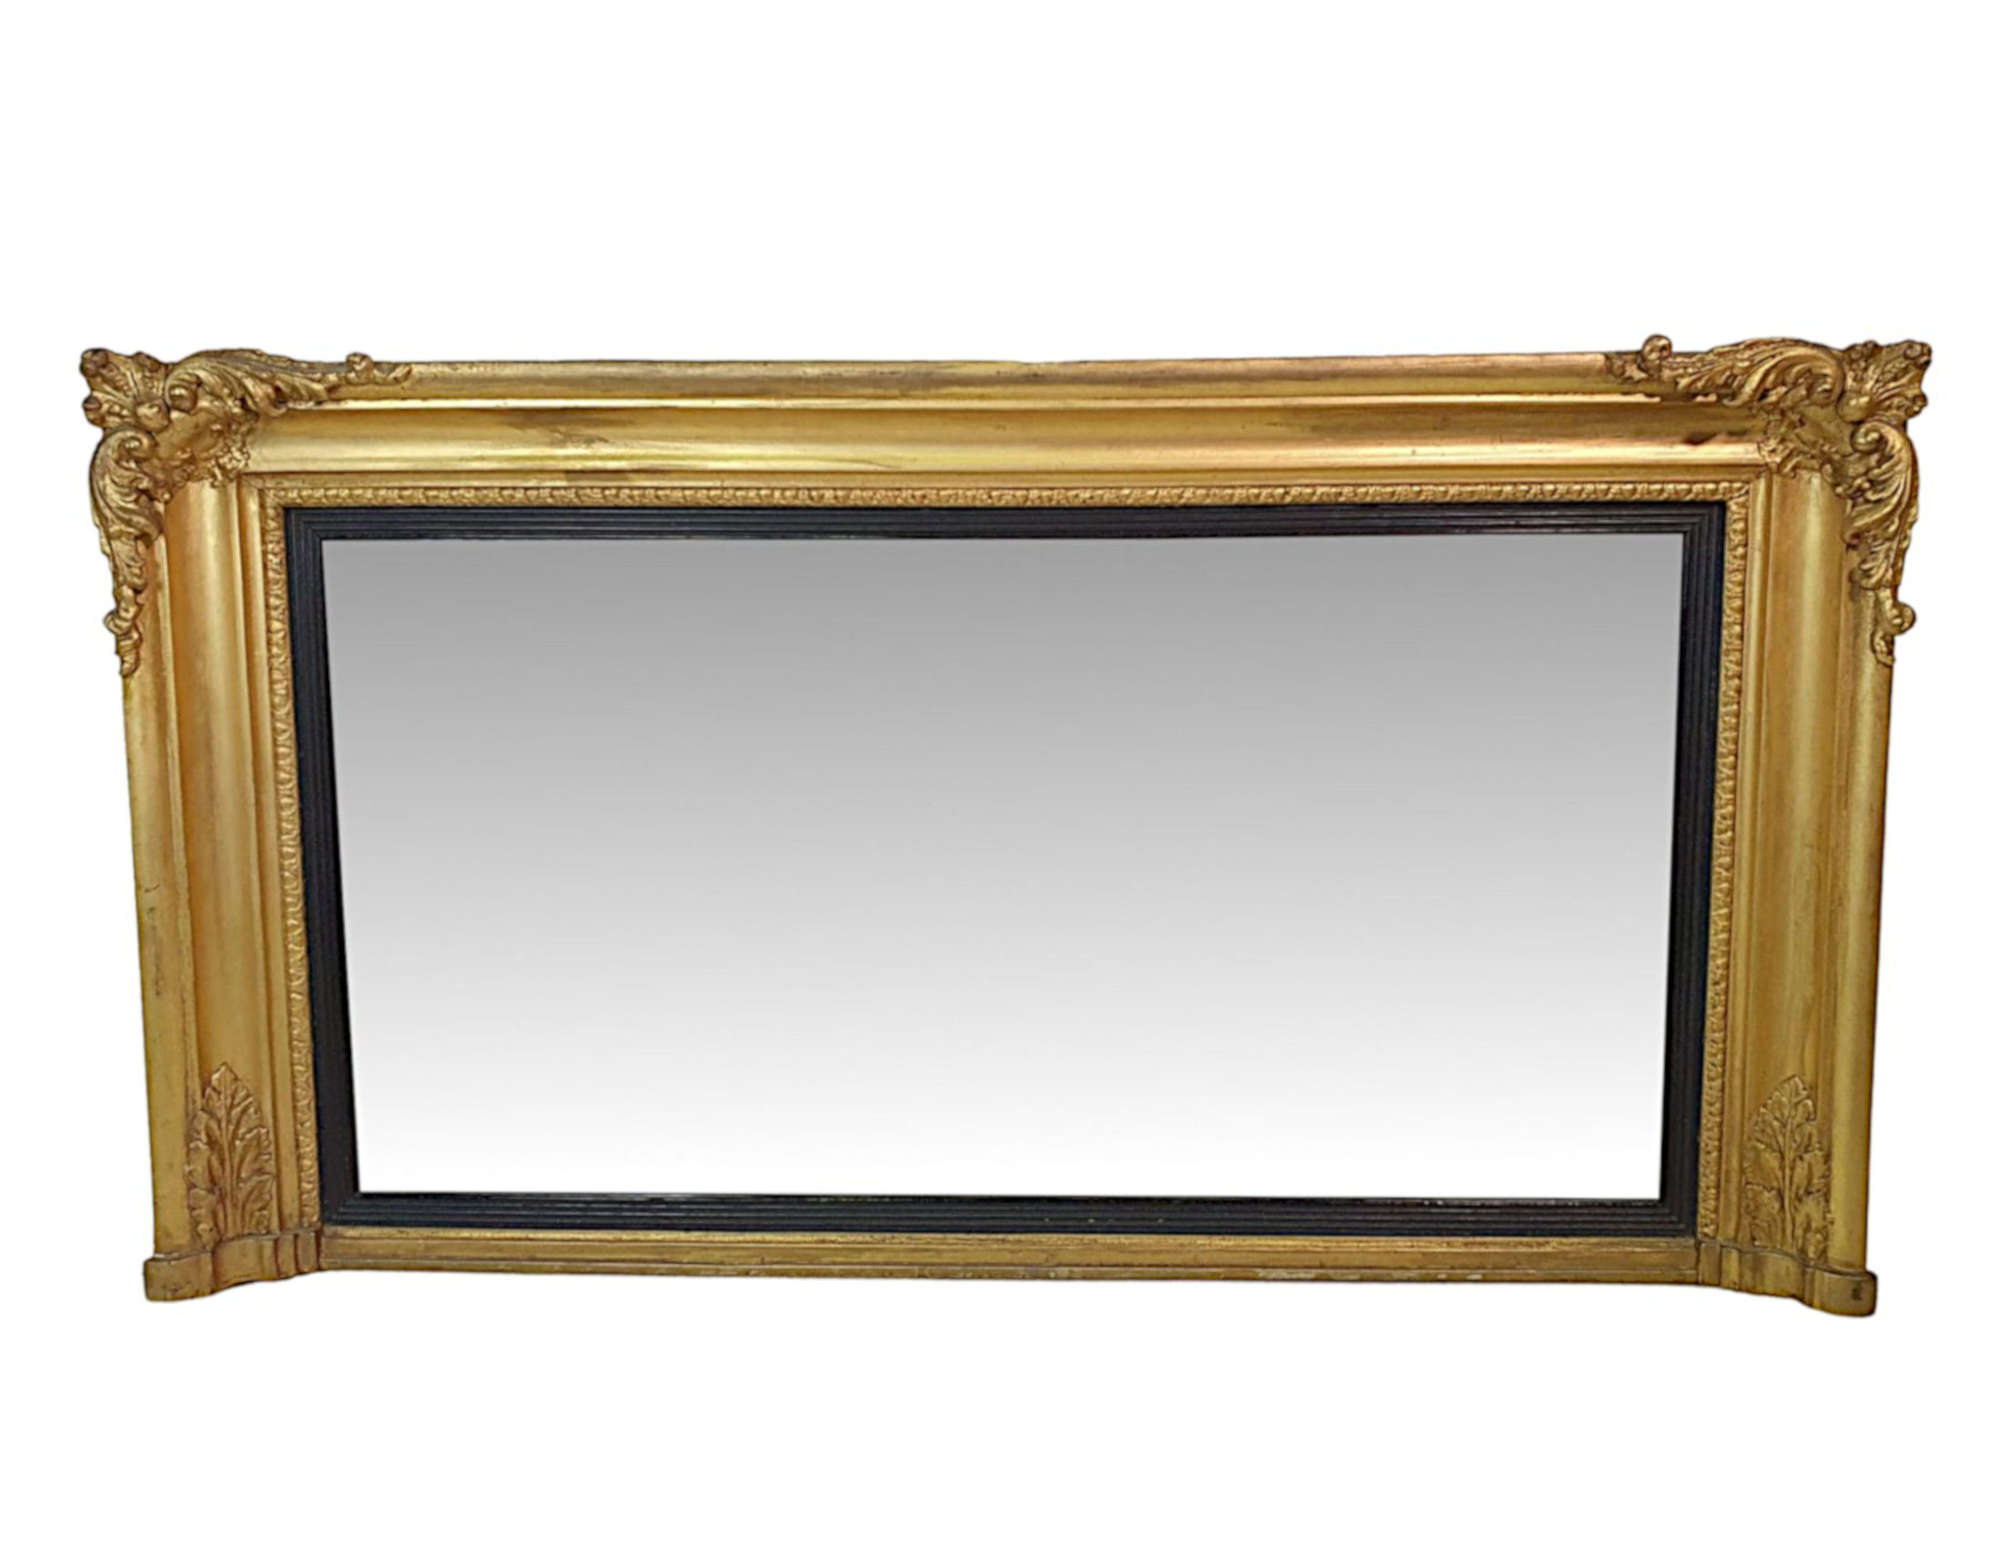 Early 19th Century Regency Giltwood Antique Mirror